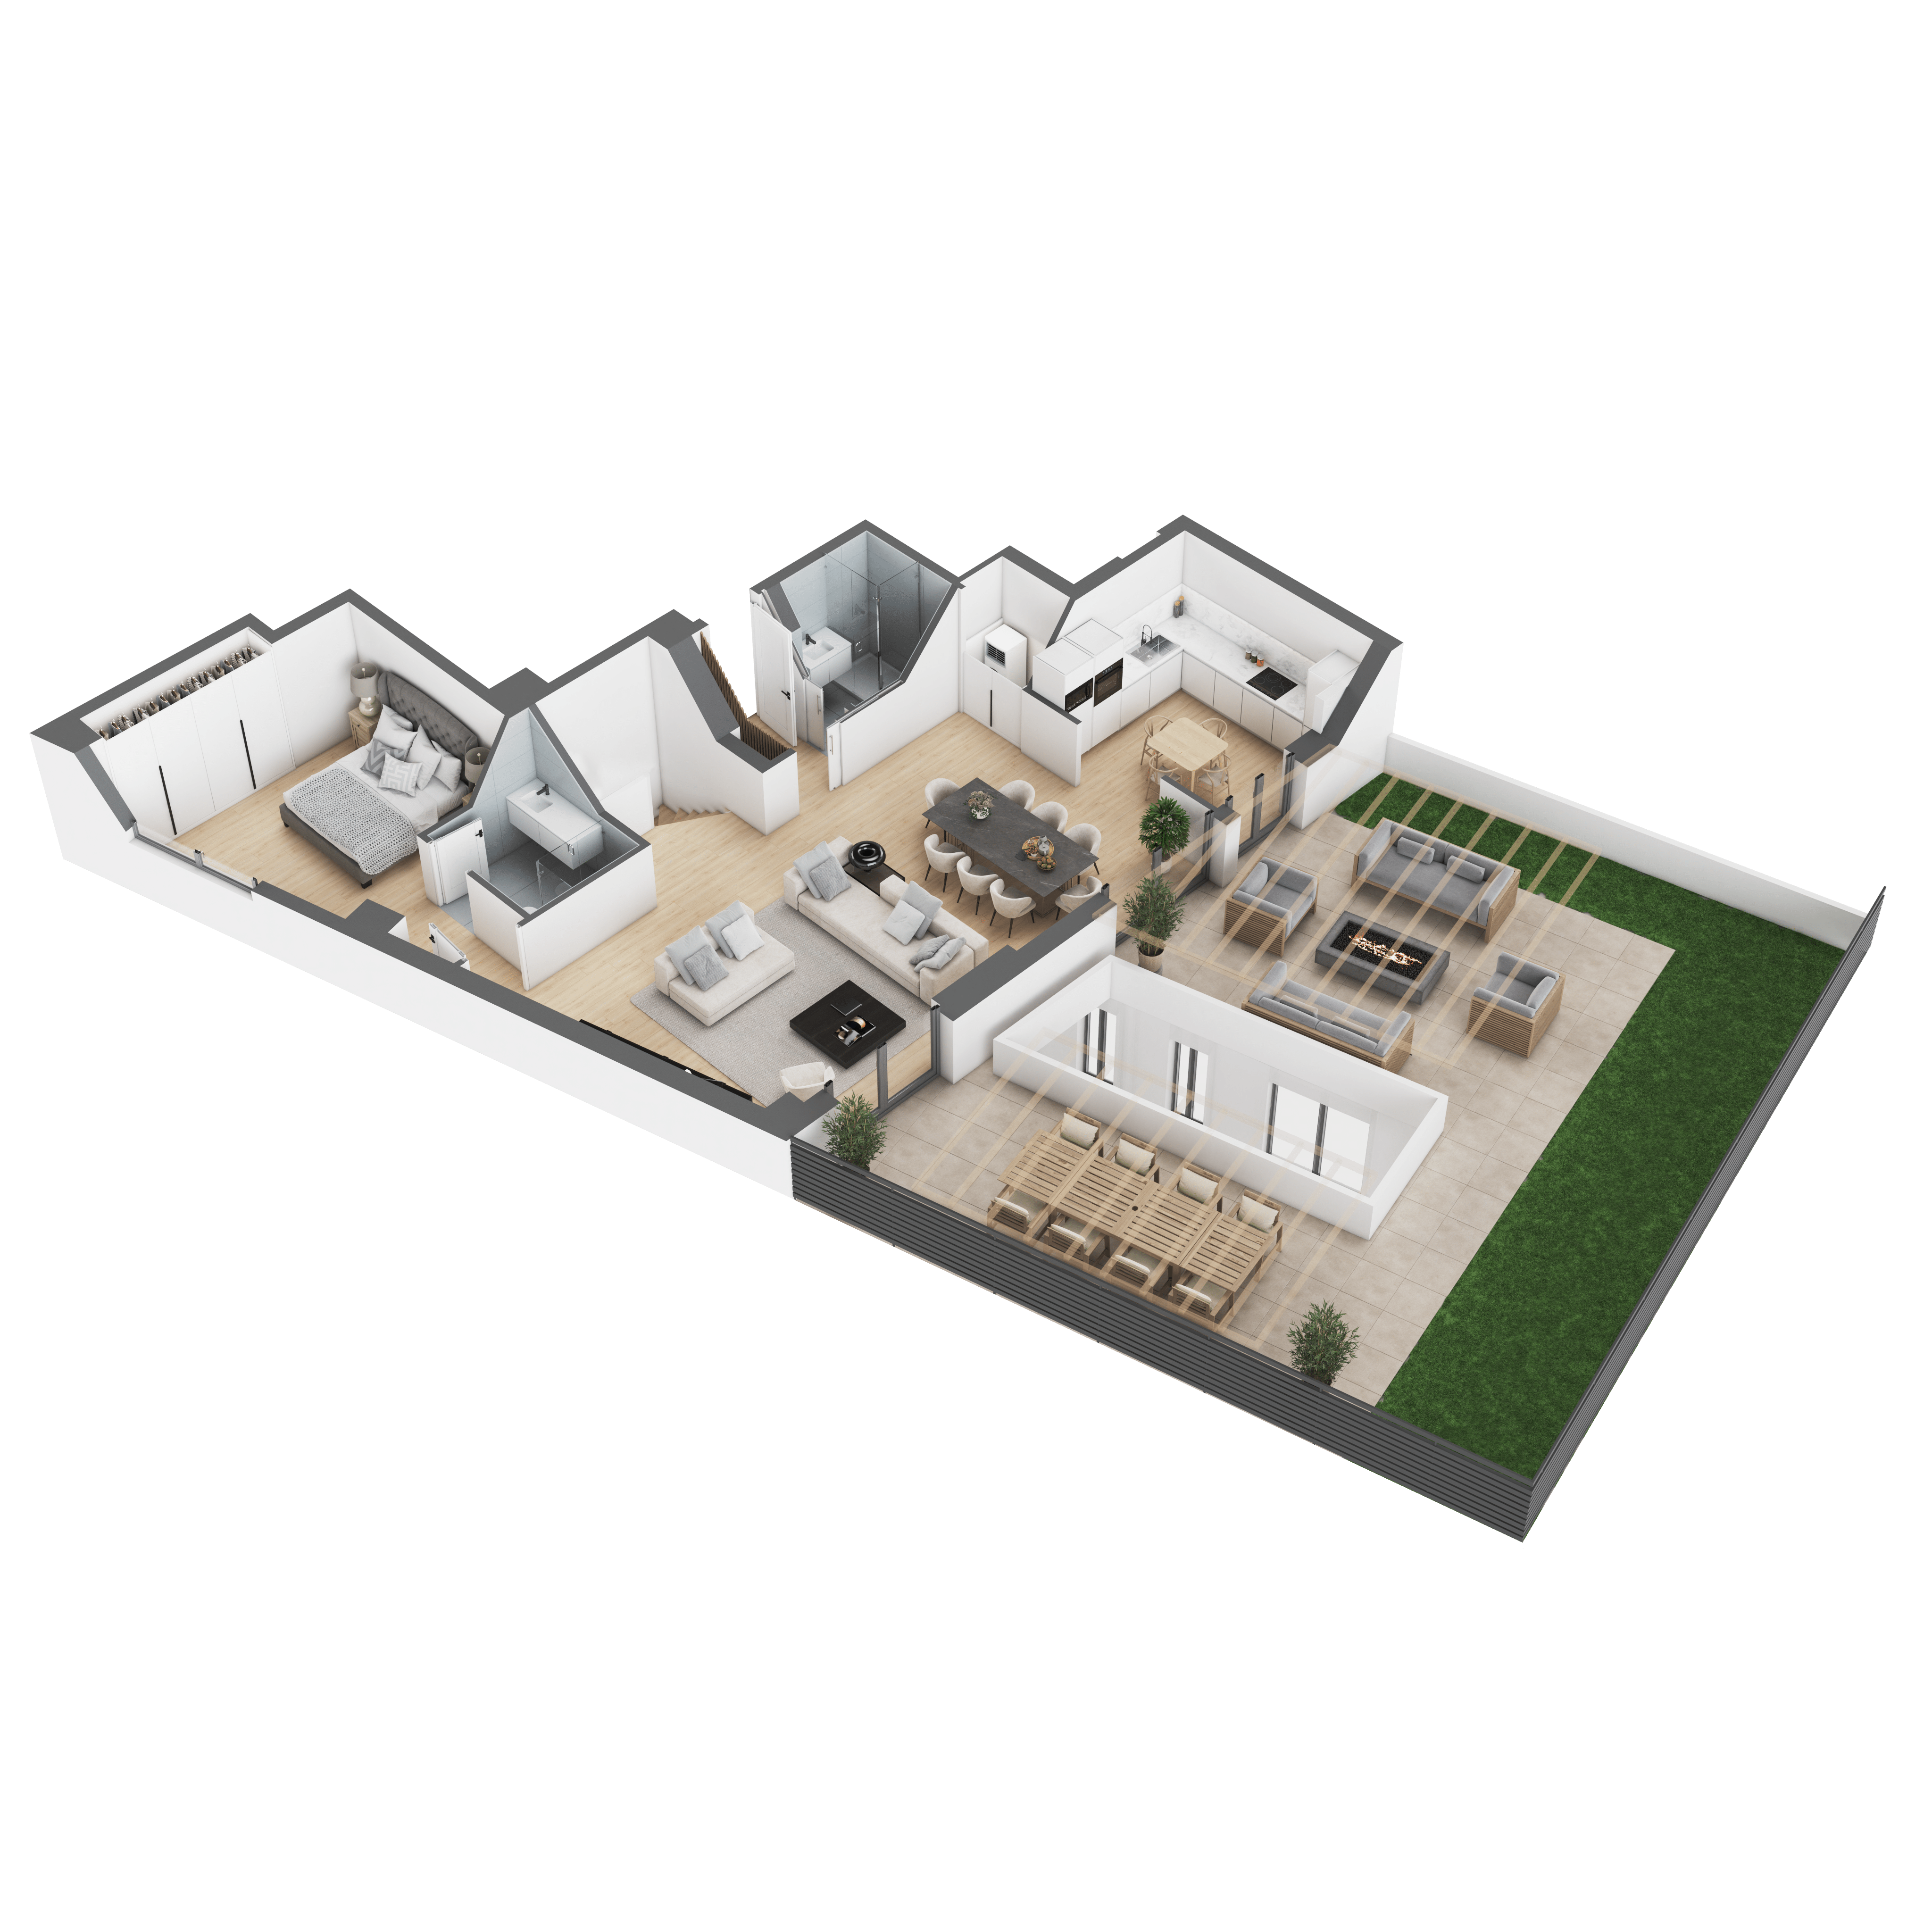 High definition 3d model of apartment in portugal for real estate firm featuring high quality furniture, outdoor space, and 4k rendering